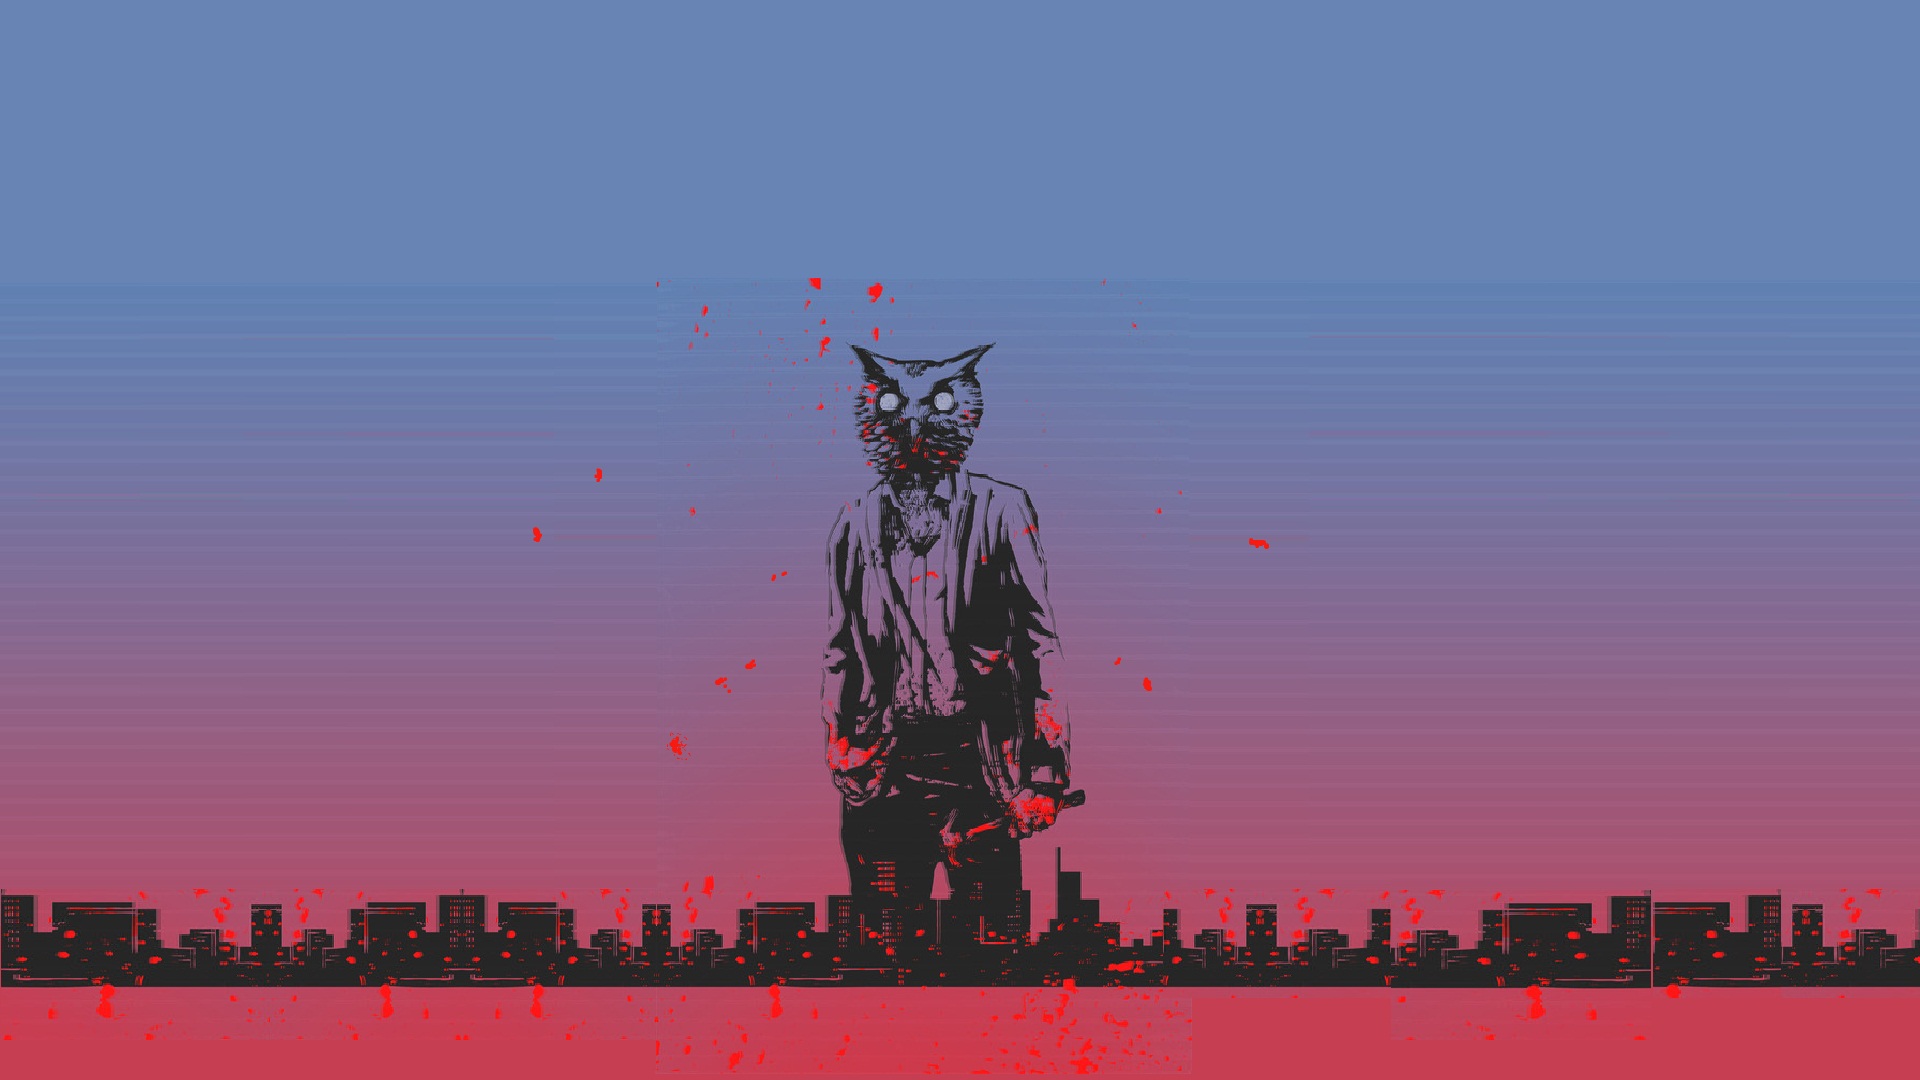 hotline miami 2: wrong number, hotline miami, video game